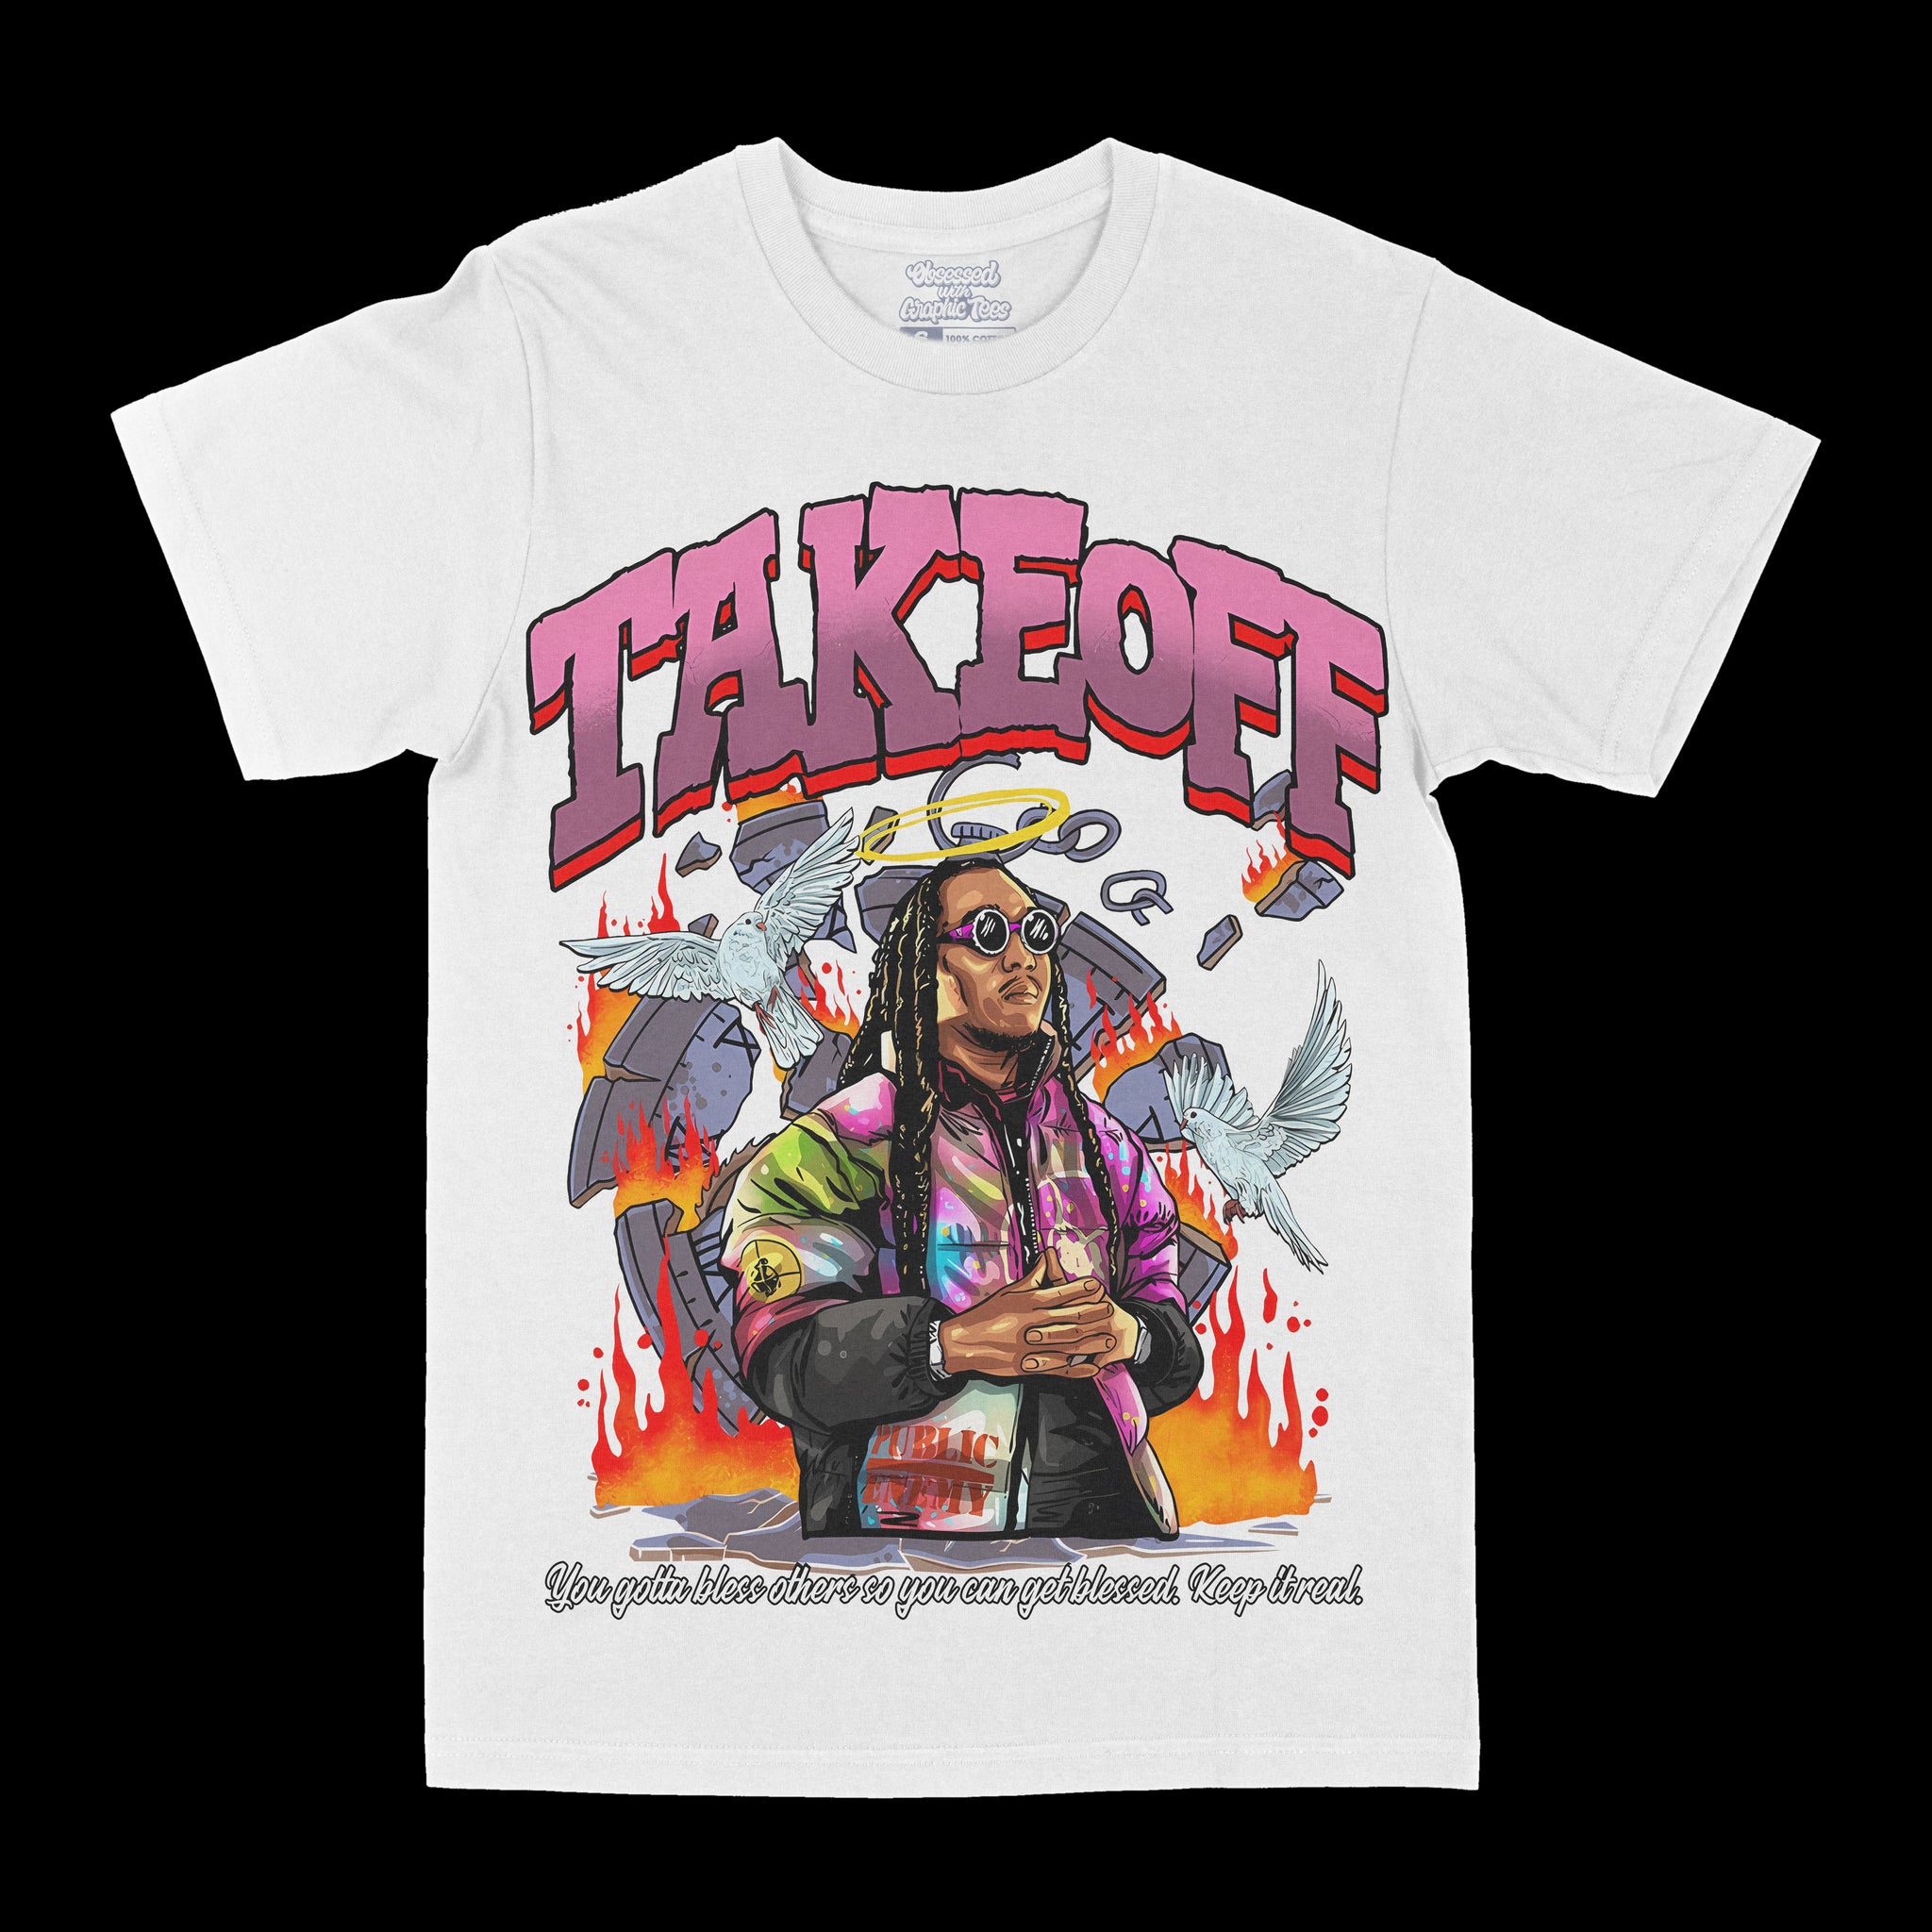 Takeoff "Keep It Real" Graphic Tee